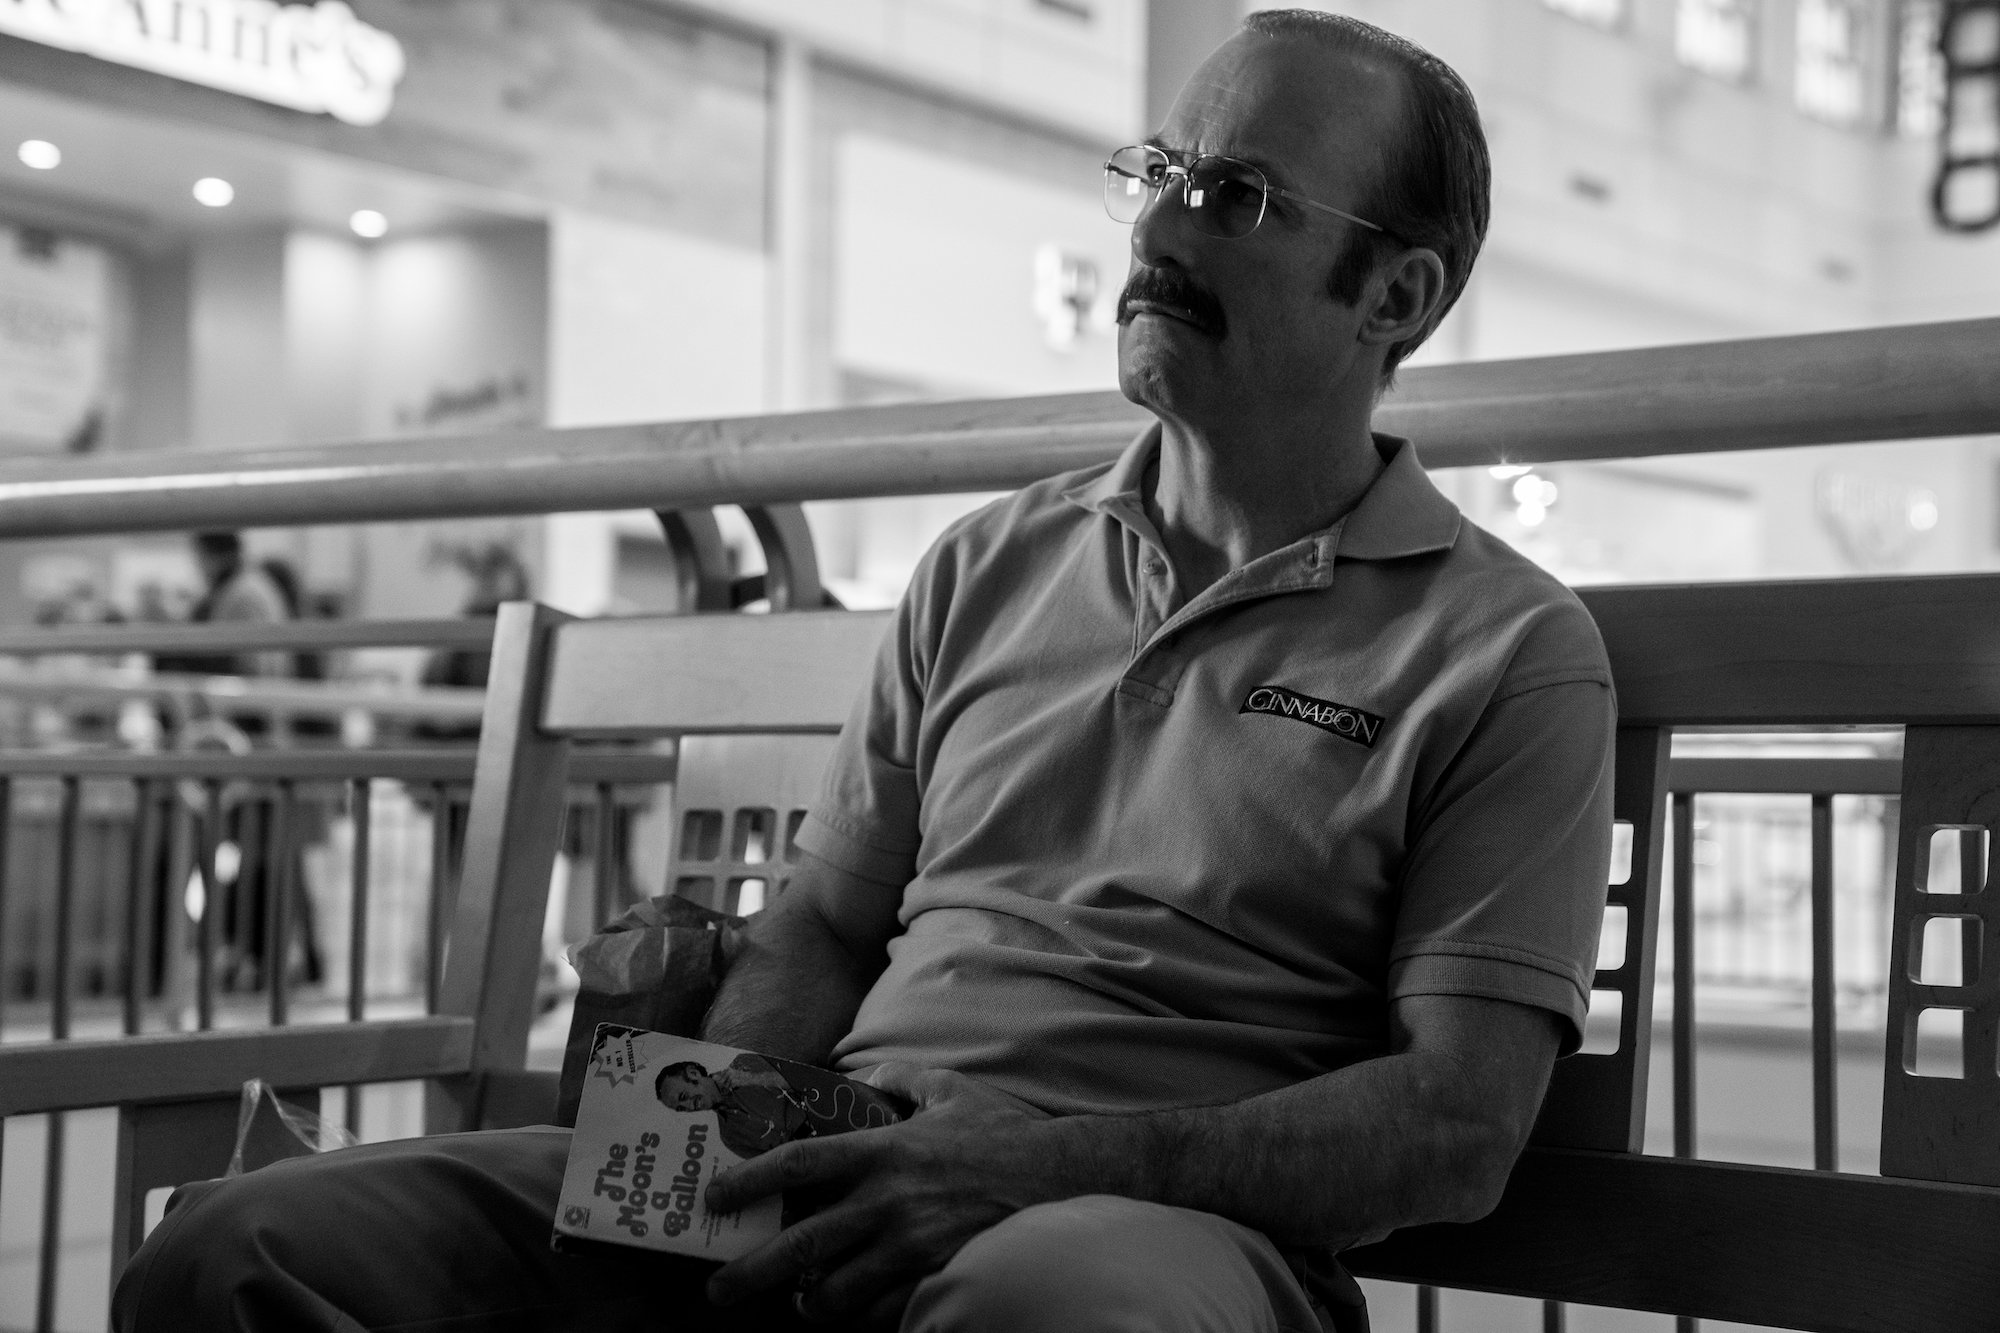 'Better Call Saul': Gene Takovic (Bob Odenkirk) sits in the mall on a bench